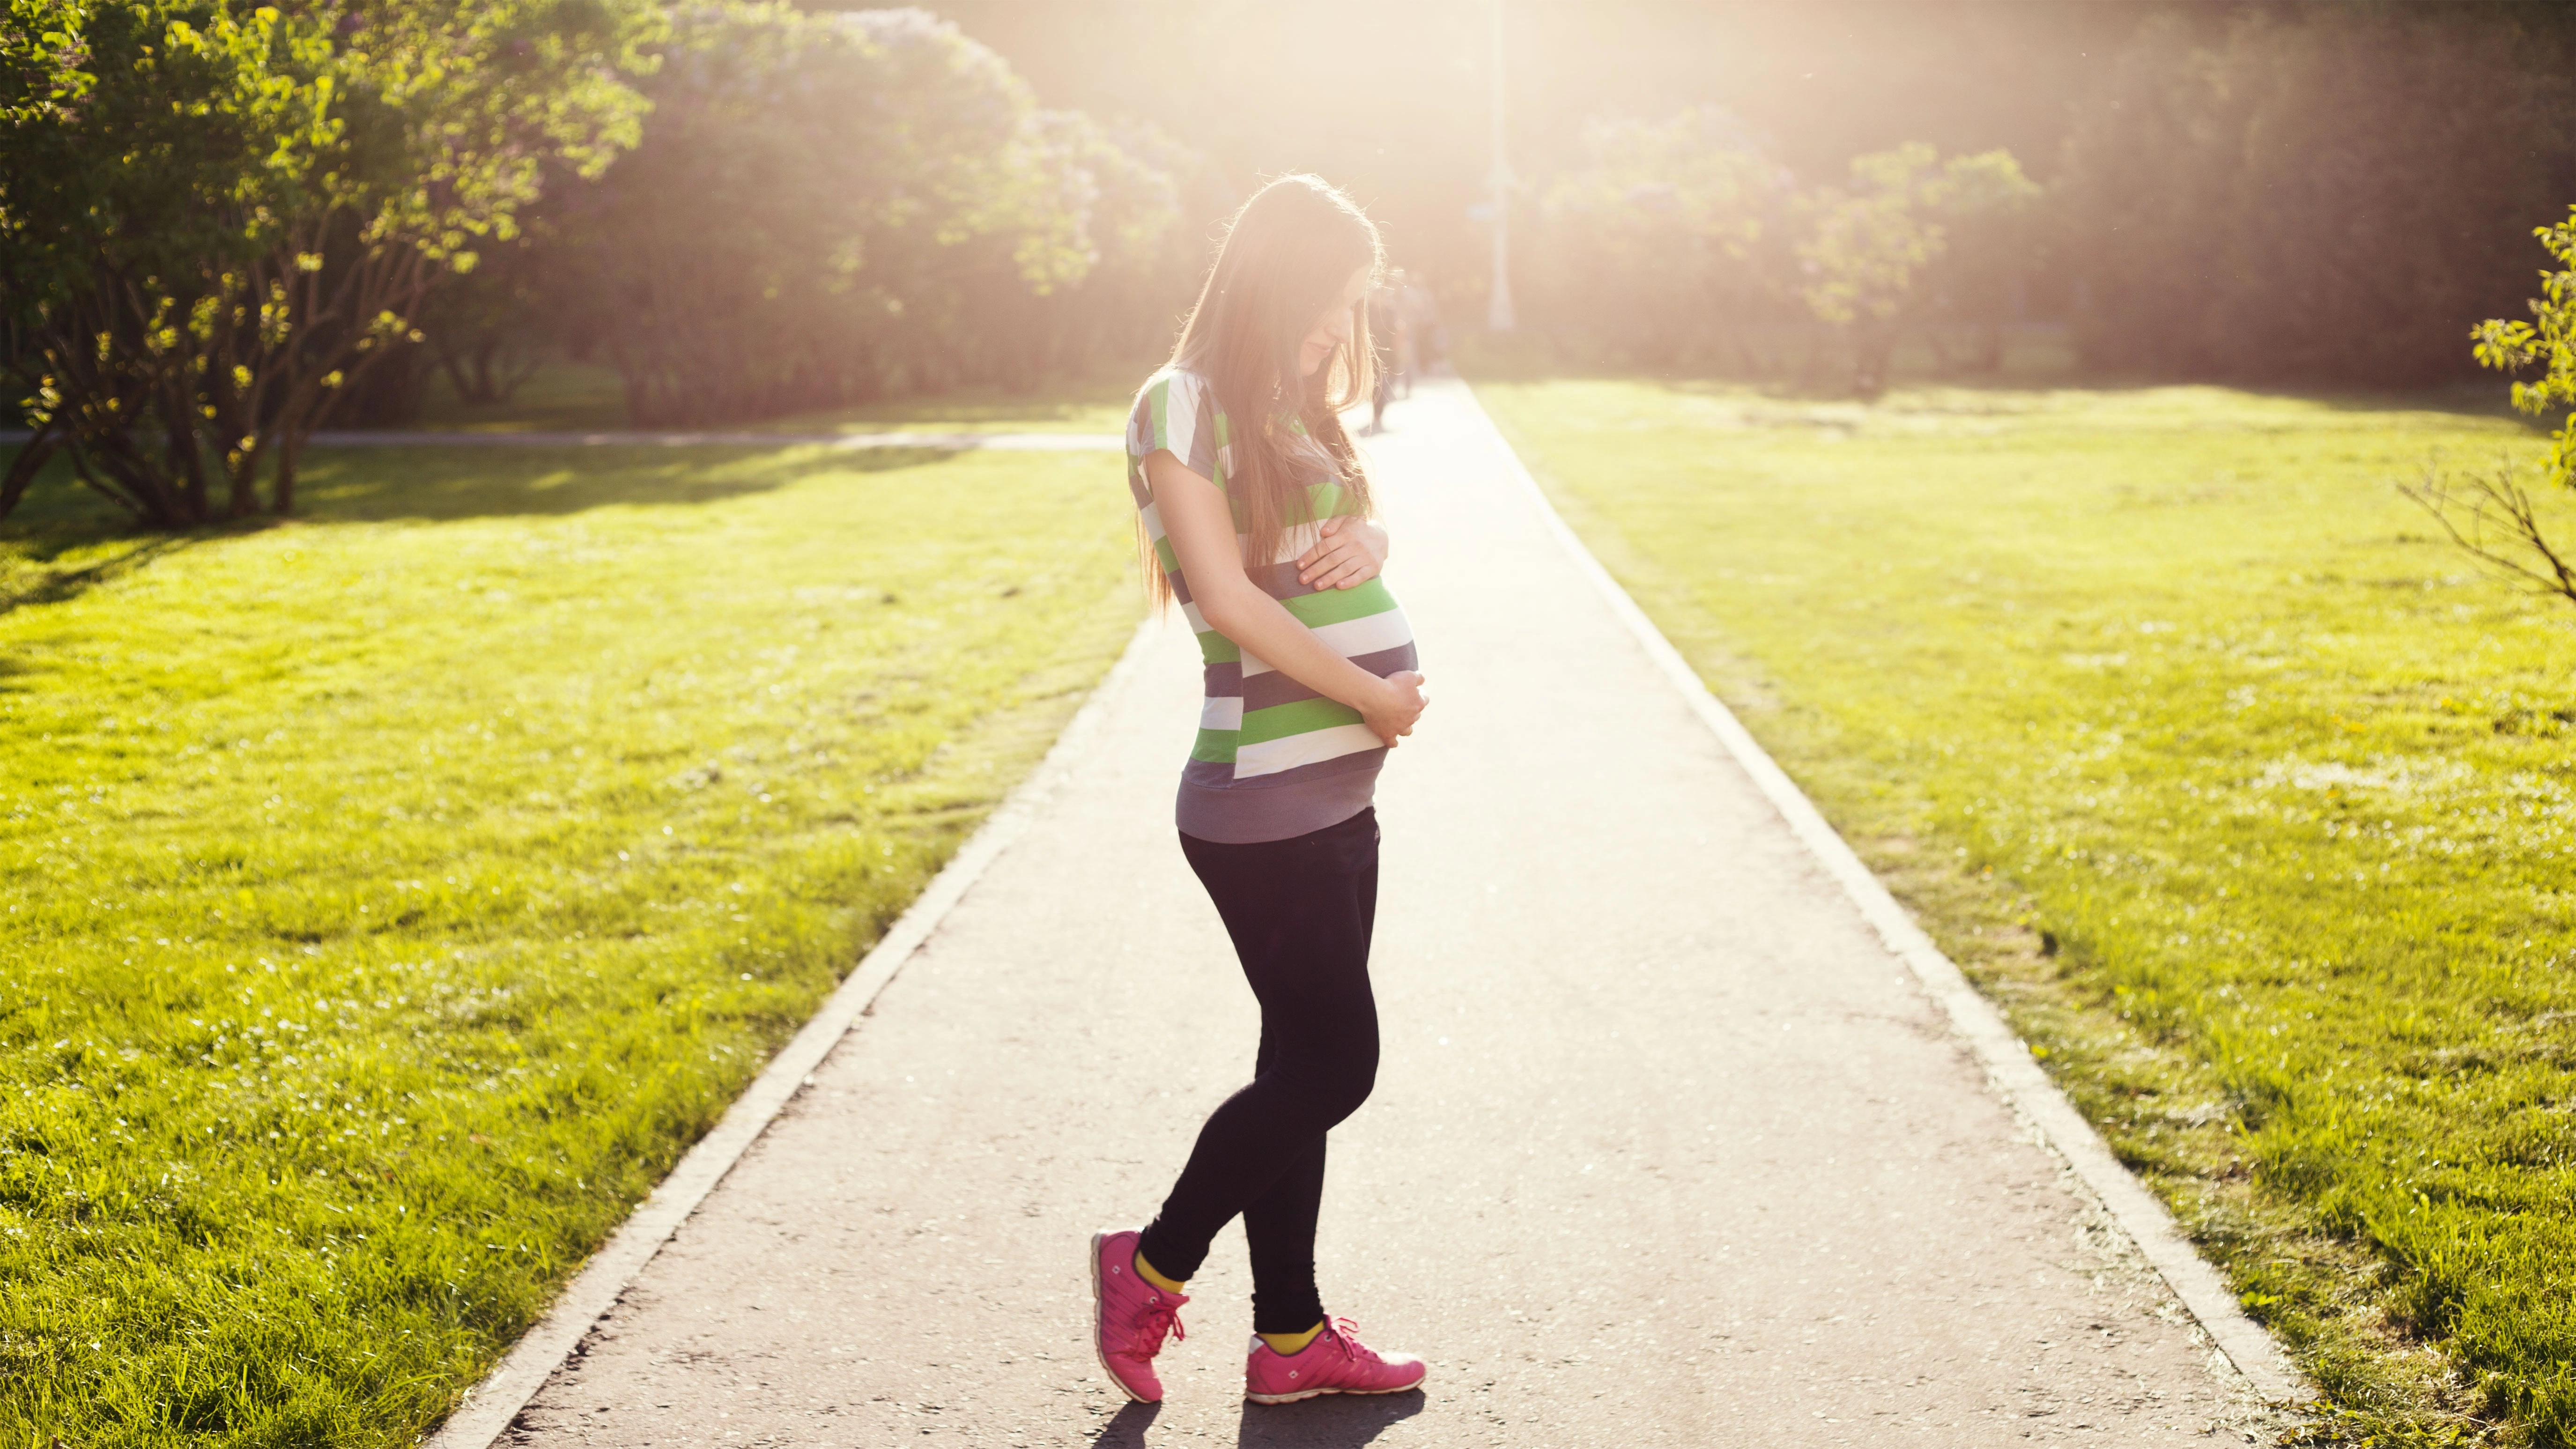 Pregnancy fitness: Workouts for expecting moms